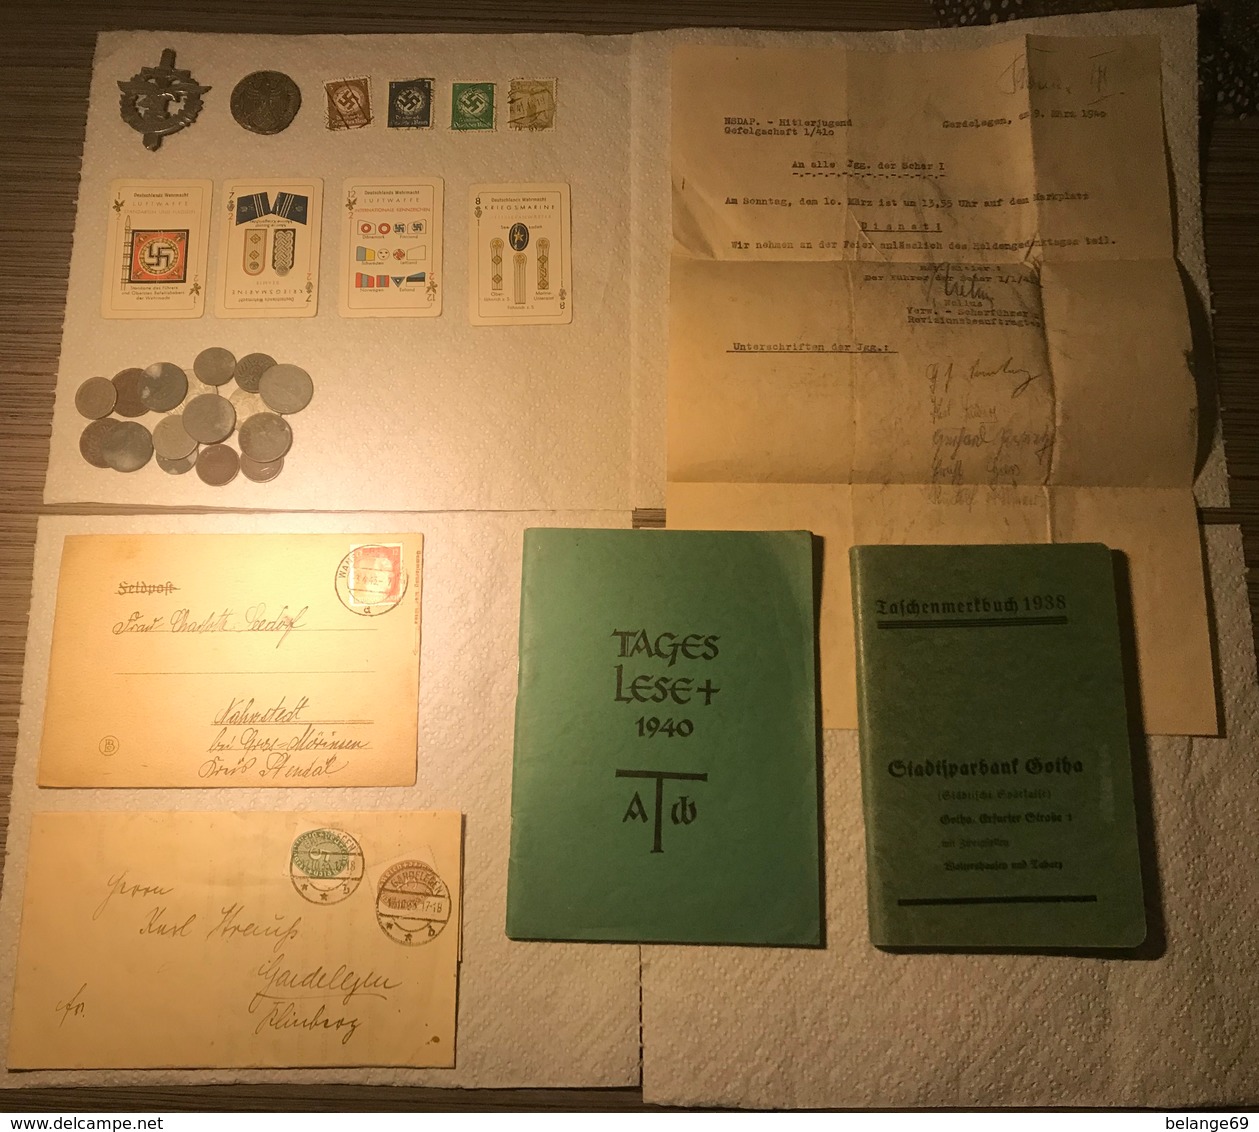 Enorme Lot D’objets (medaille, Insigne, Cartes Tobacco, Monnaies, Documents, Timbres) - Allemagne - WWII - A Voir ! - 1939-45